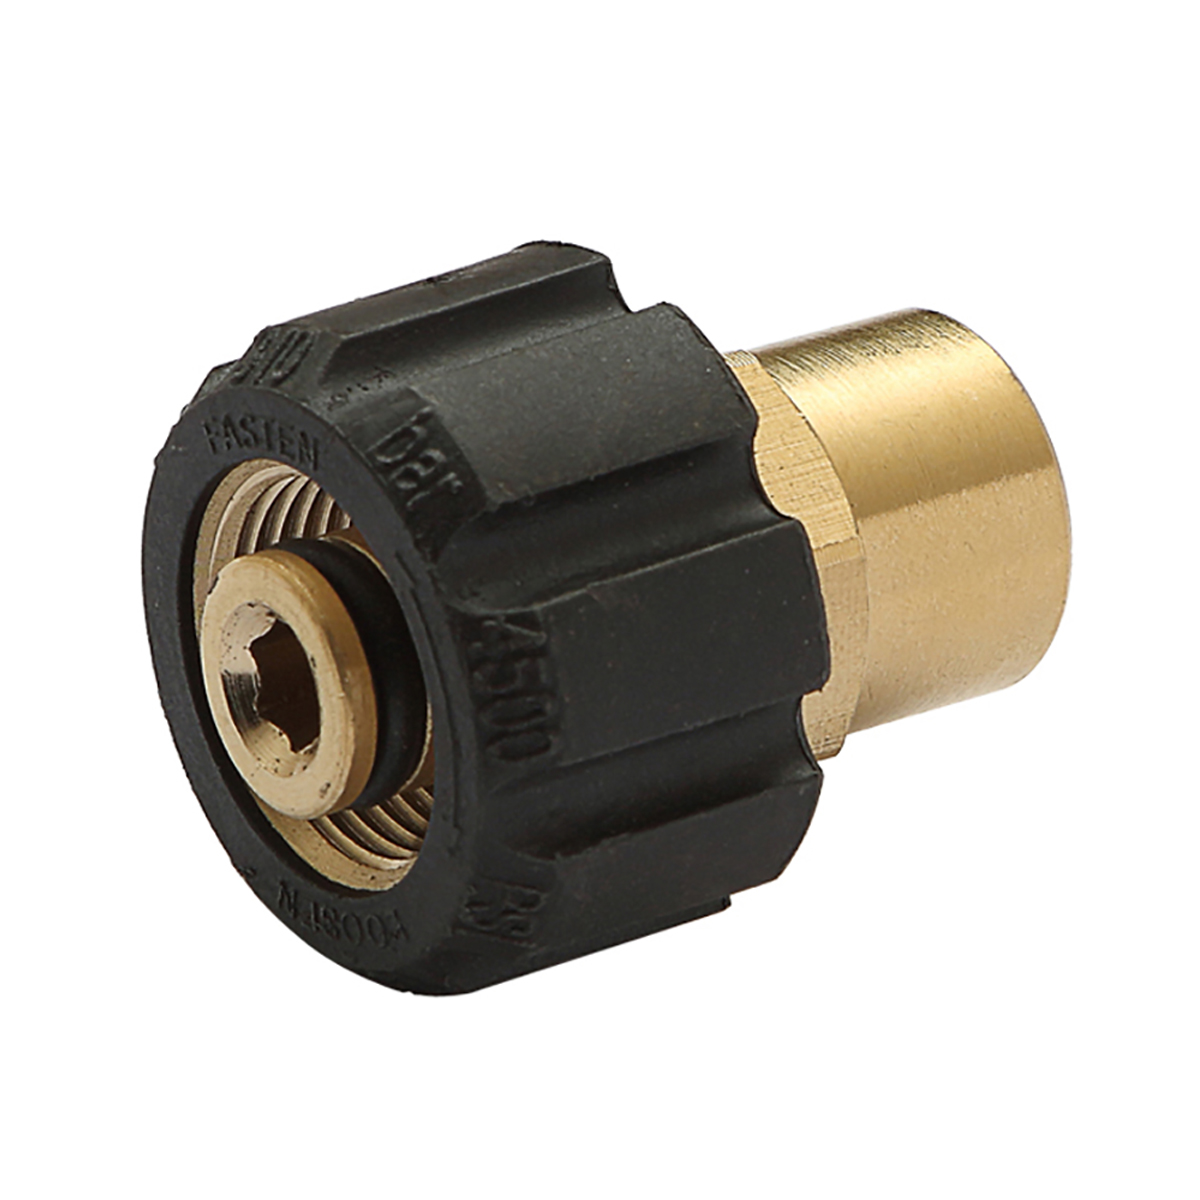 U203905 Twist Disconnect Coupler, 3/8 in x 22 mm, FPT x Female, For Use With: 7641P Plugs